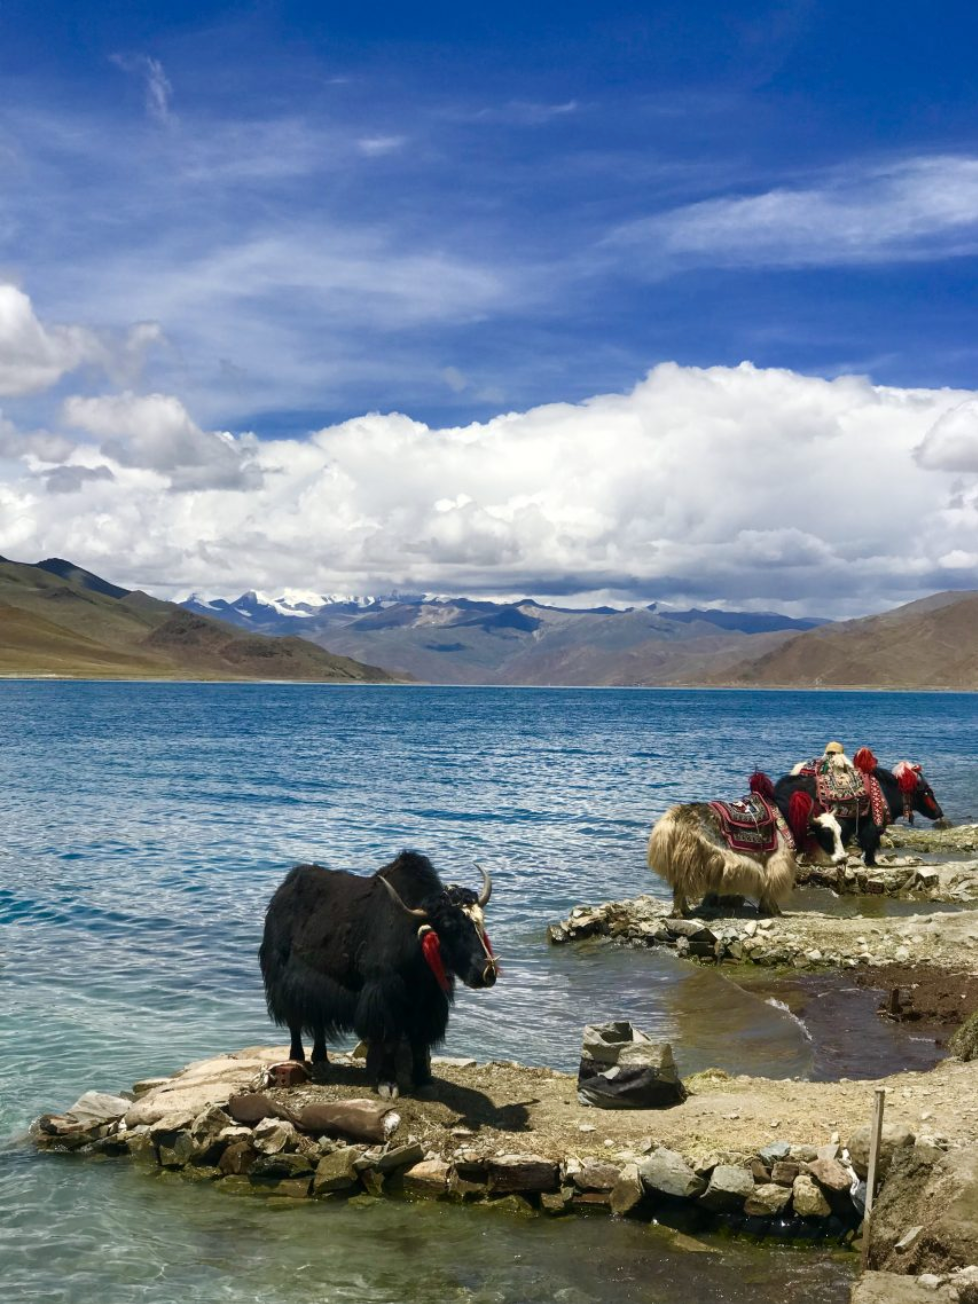 Global Studies photo contest winners highlight stories from Tibet to Palo Alto